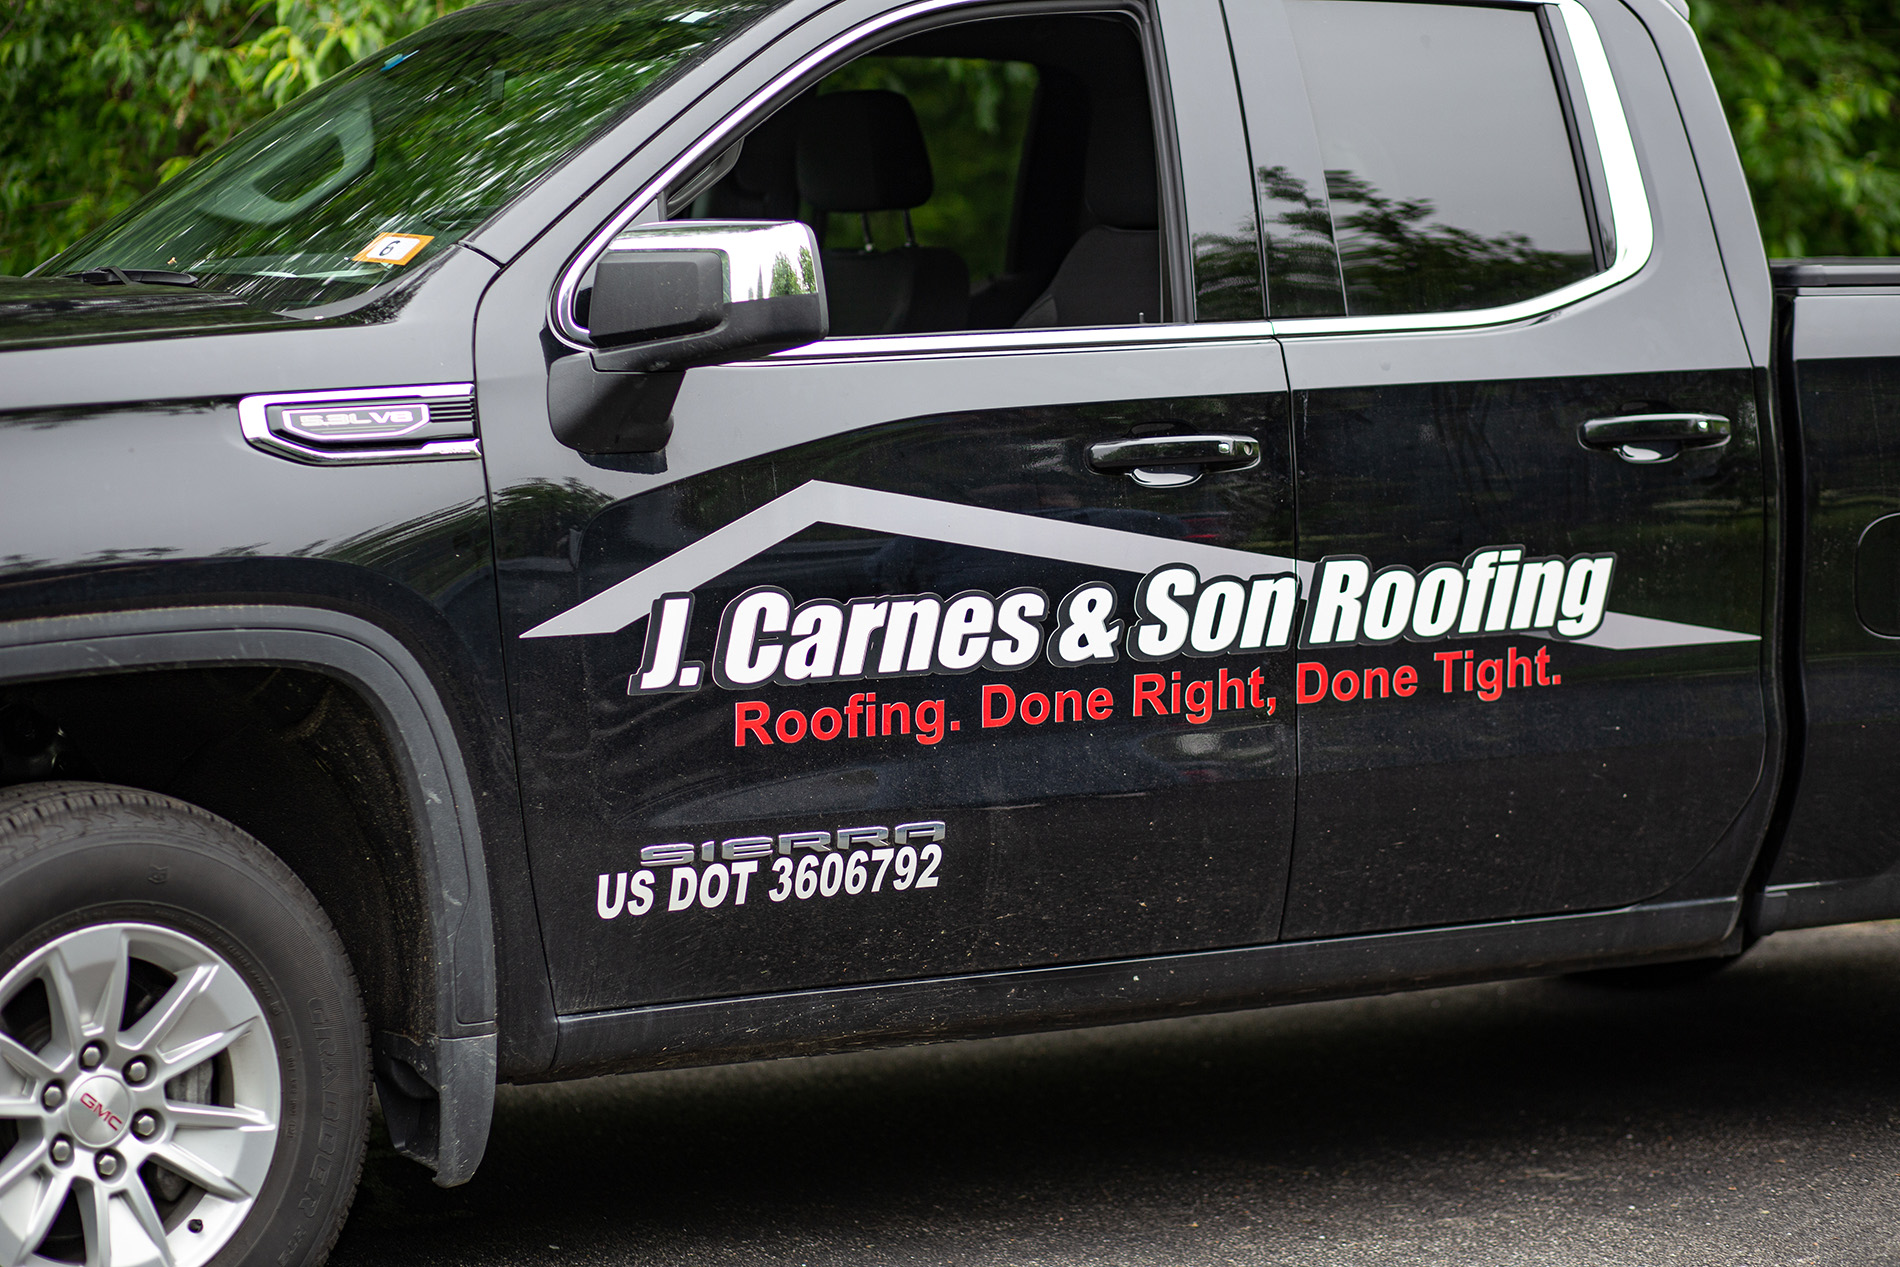 Certified roofing in Durham, NH